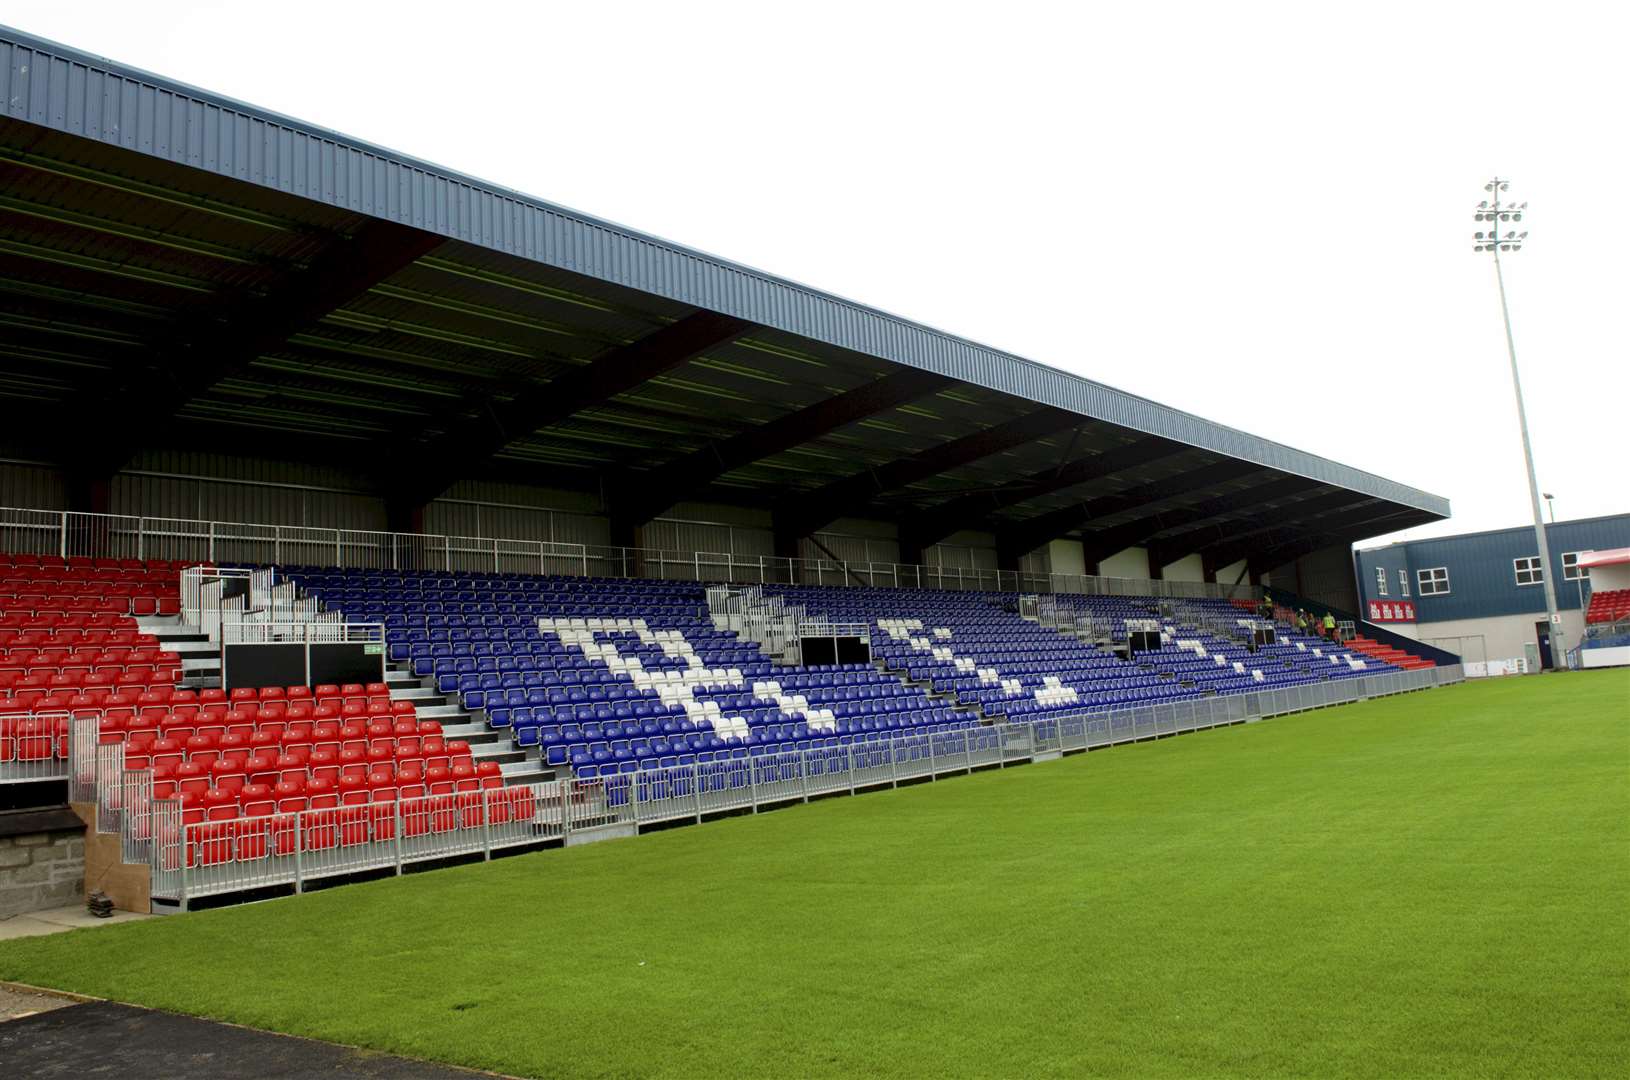 Ross County Football Club have announced that they will be re-launching the club's foundation.